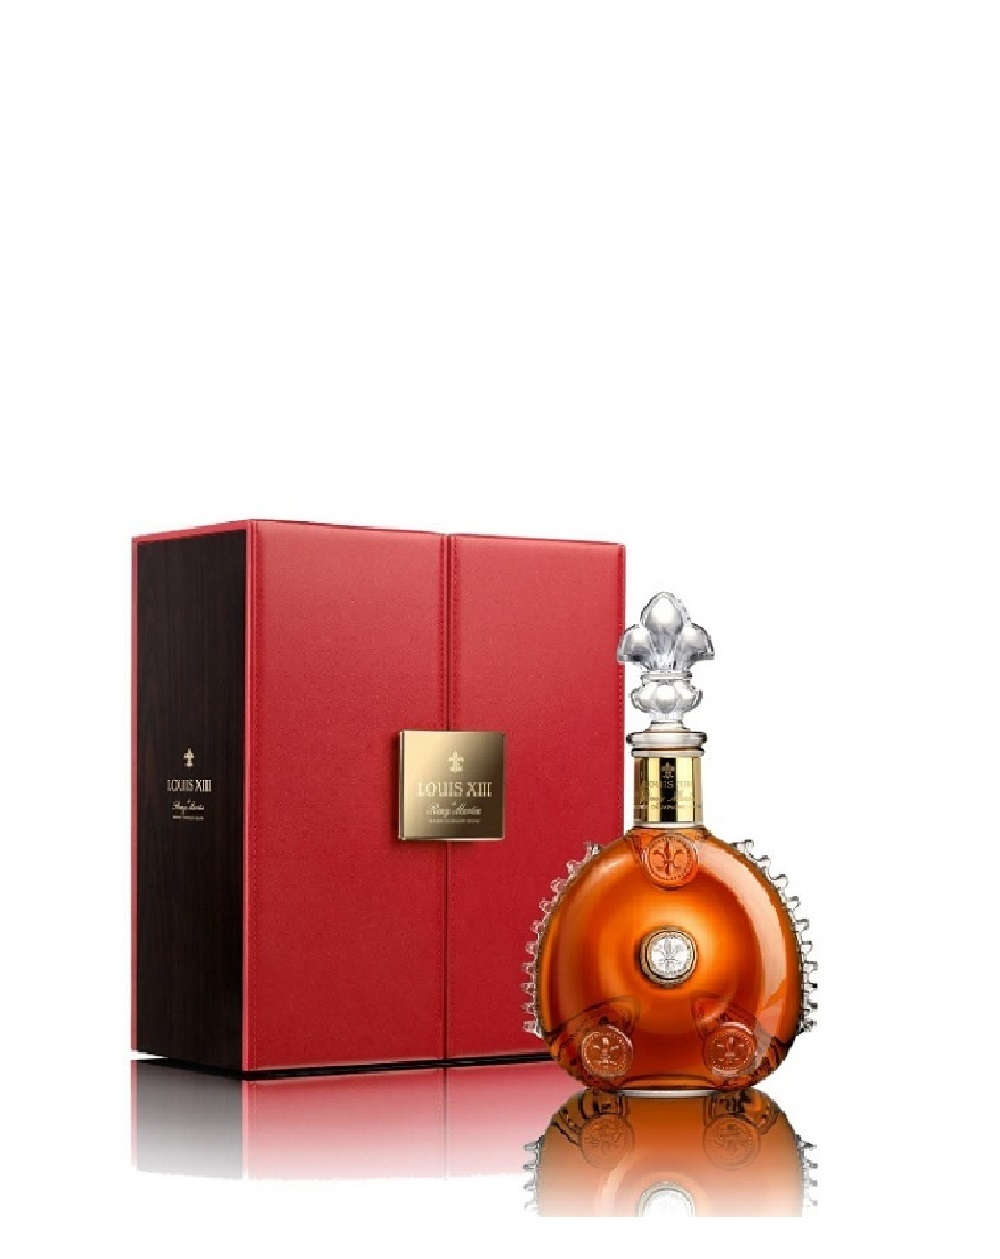 Introduction to Rémy Martin Louis XIII Visit & Tasting in Cognac France